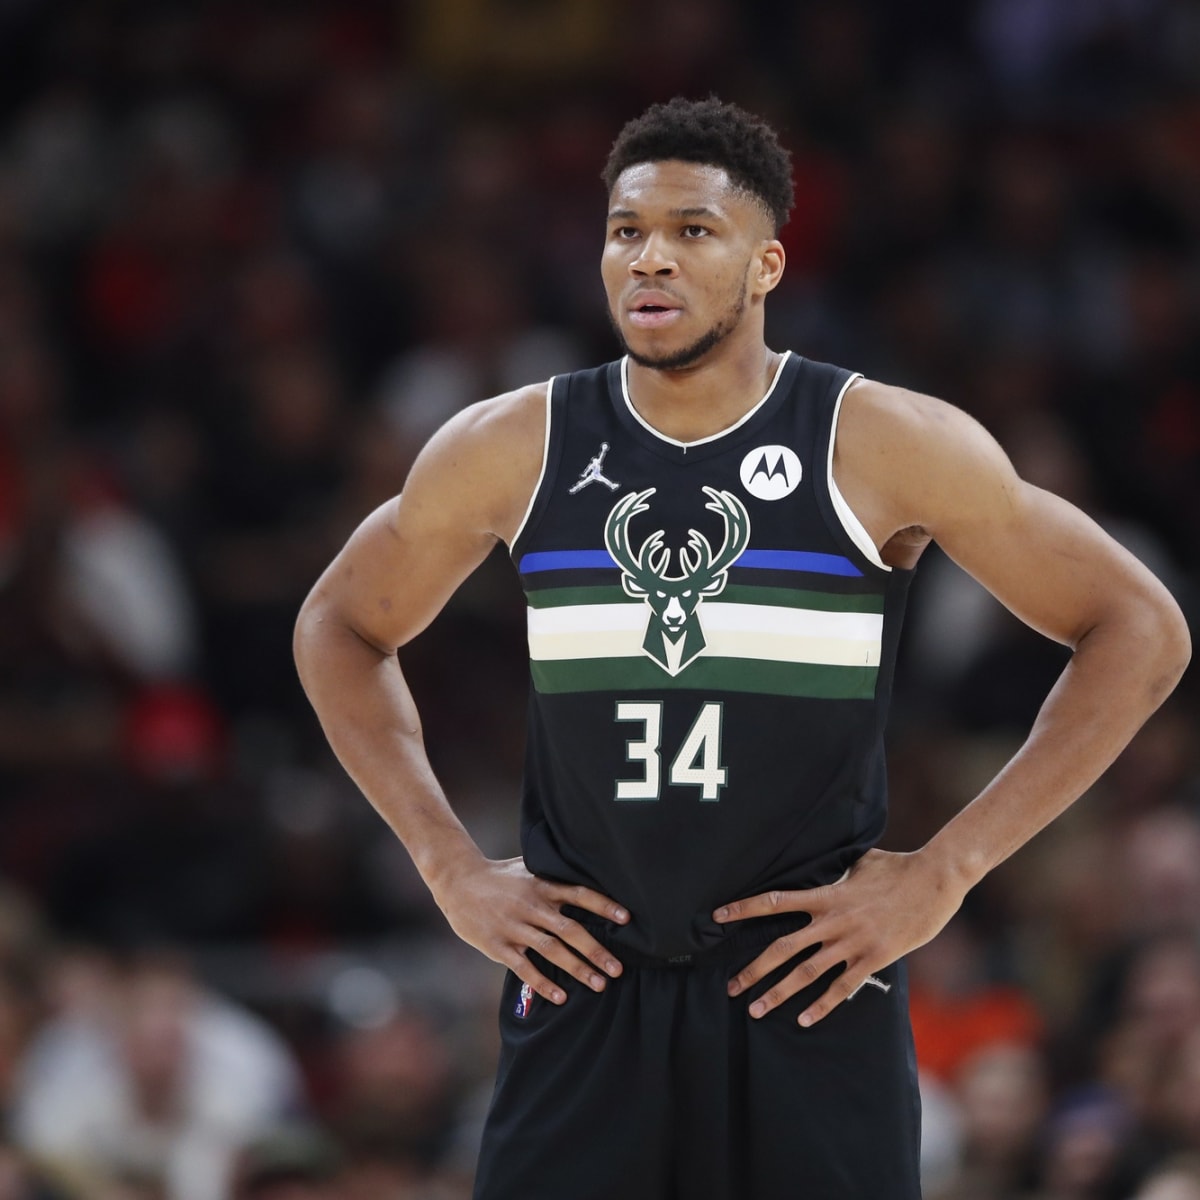 How Much Money Does Giannis Antetokounmpo Make? The NBA Star Has An